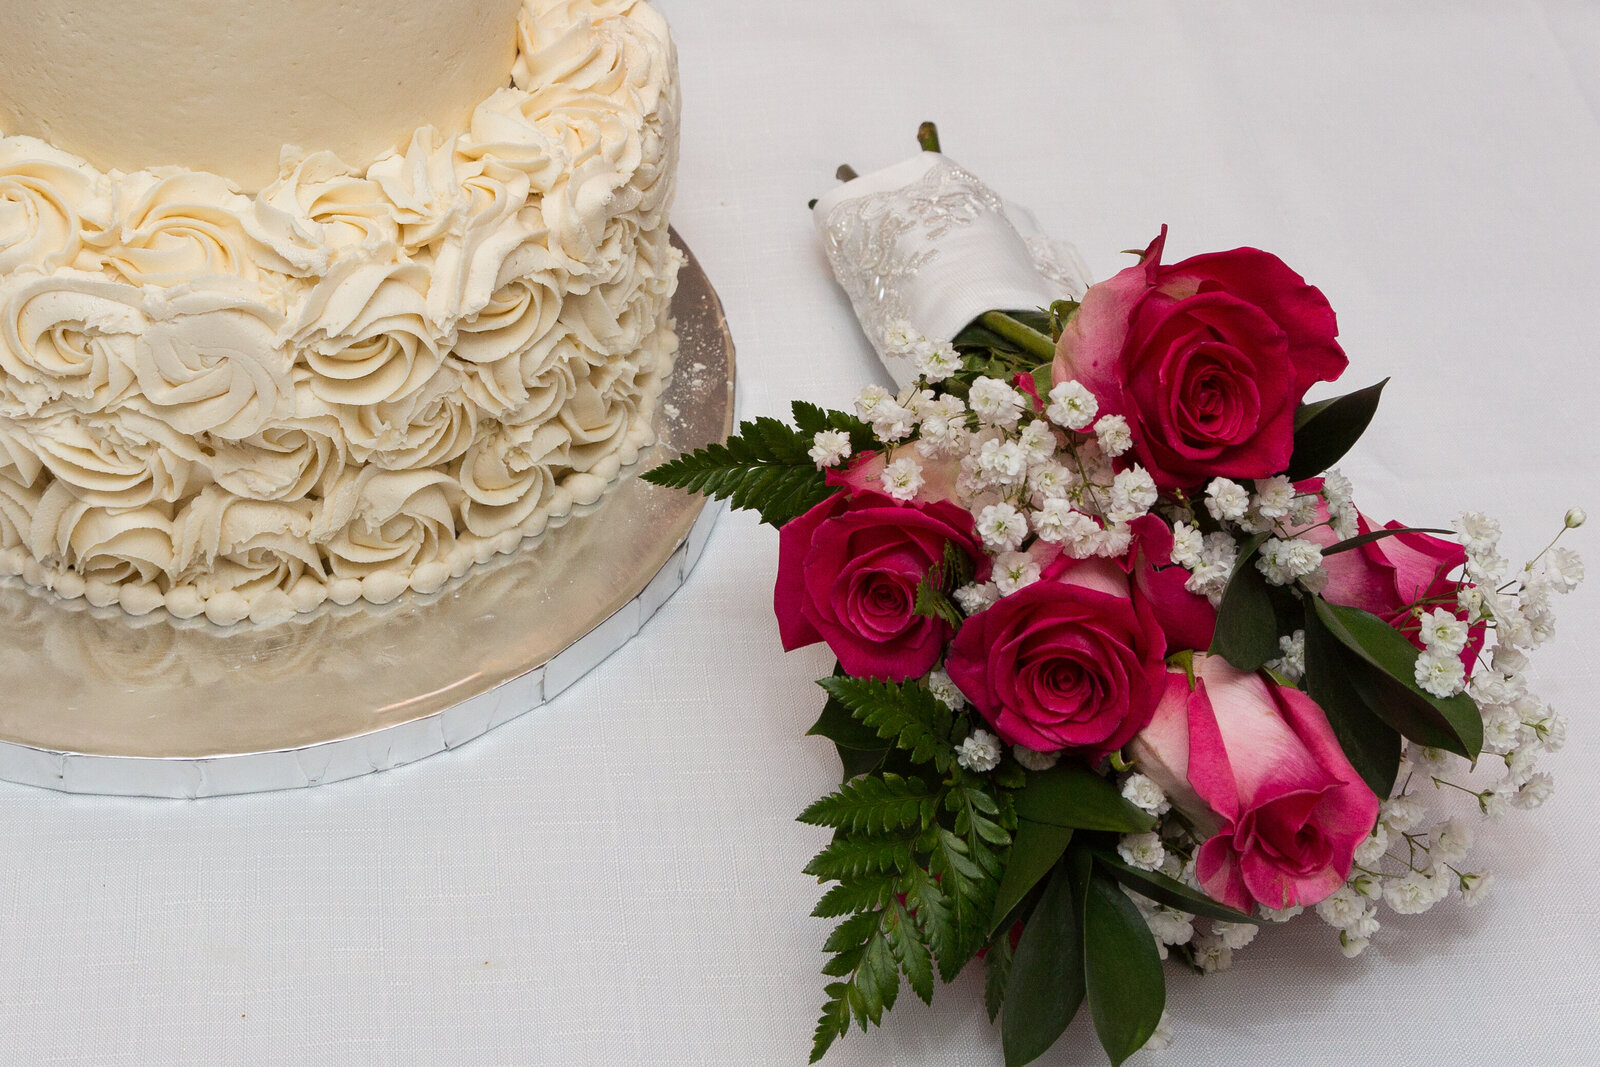 Wedding Cake and Bride's Bouquet  from an at home wedding with Ron Schroll Photography in Charlotte, NC